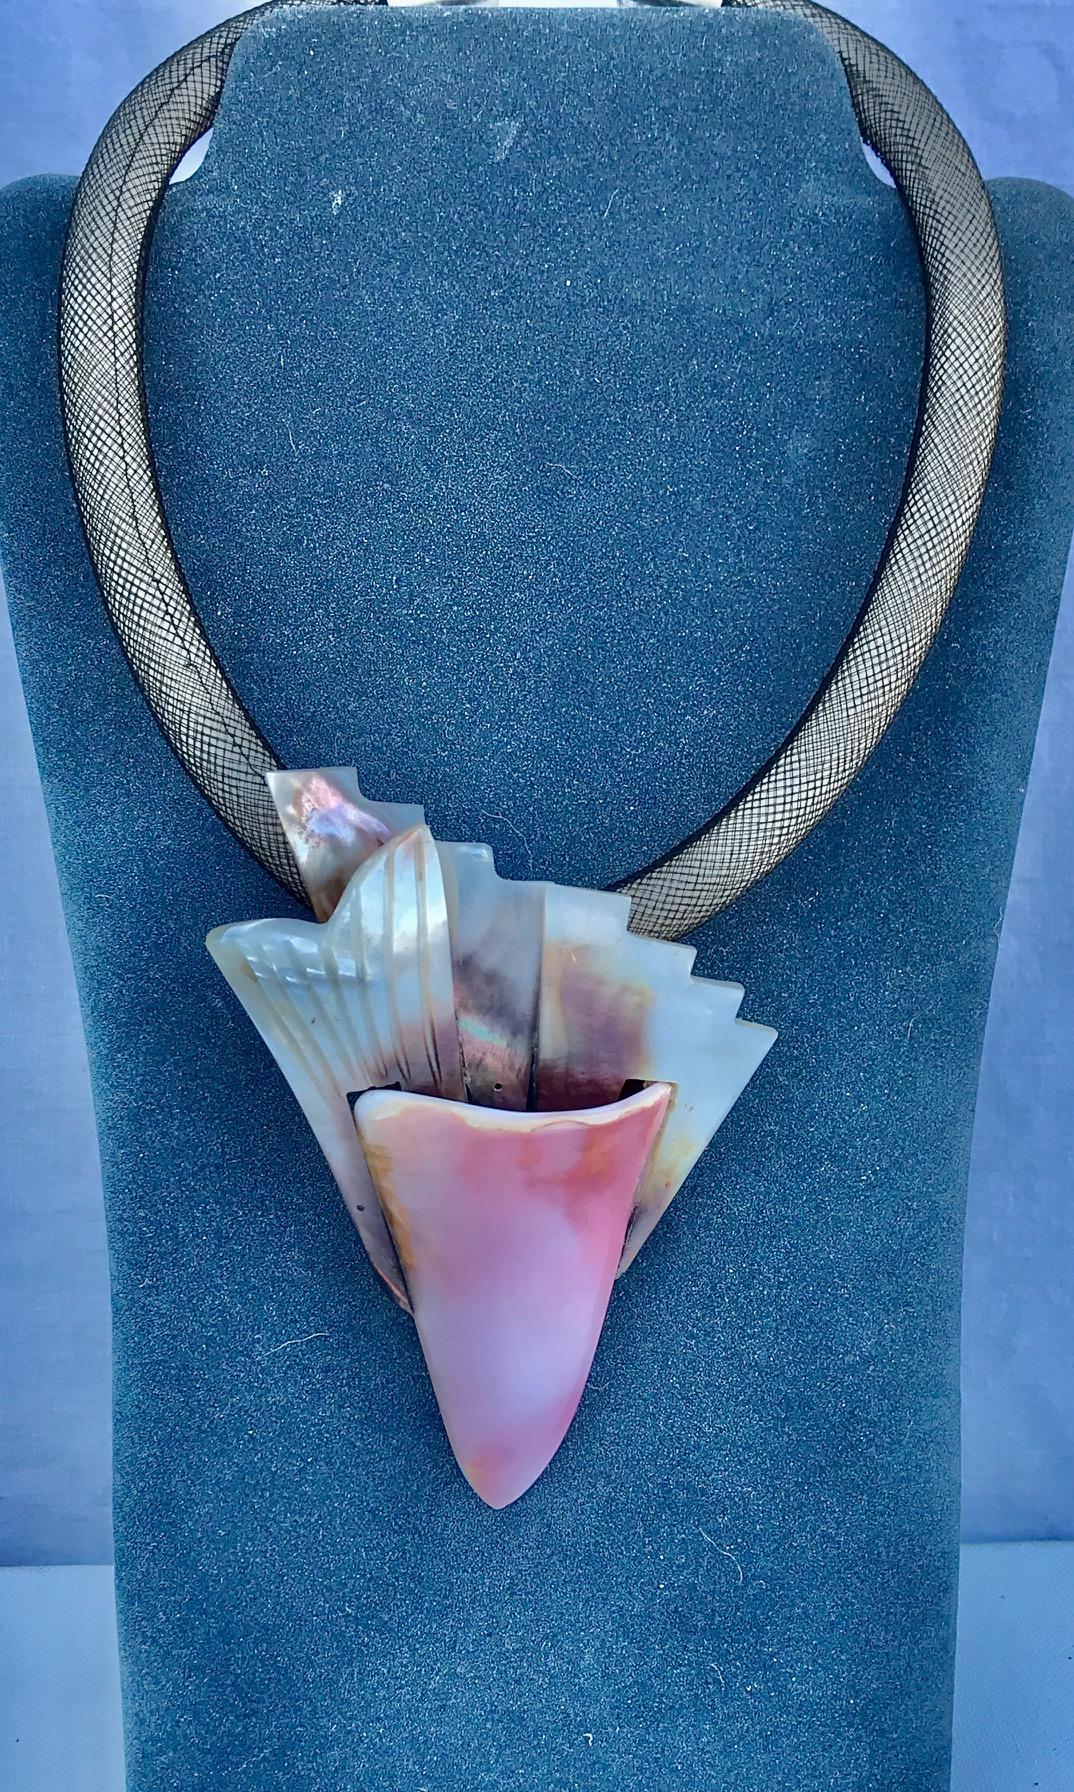 This exceptional Conch and French Deco Wild black mother of pearl  Pendant is composed from 3 Deco objects as a background for a Conch triangle. The necklace is rubber with nylon mesh and silver plated clasp.

Pink Conch shell can be seen in a photo